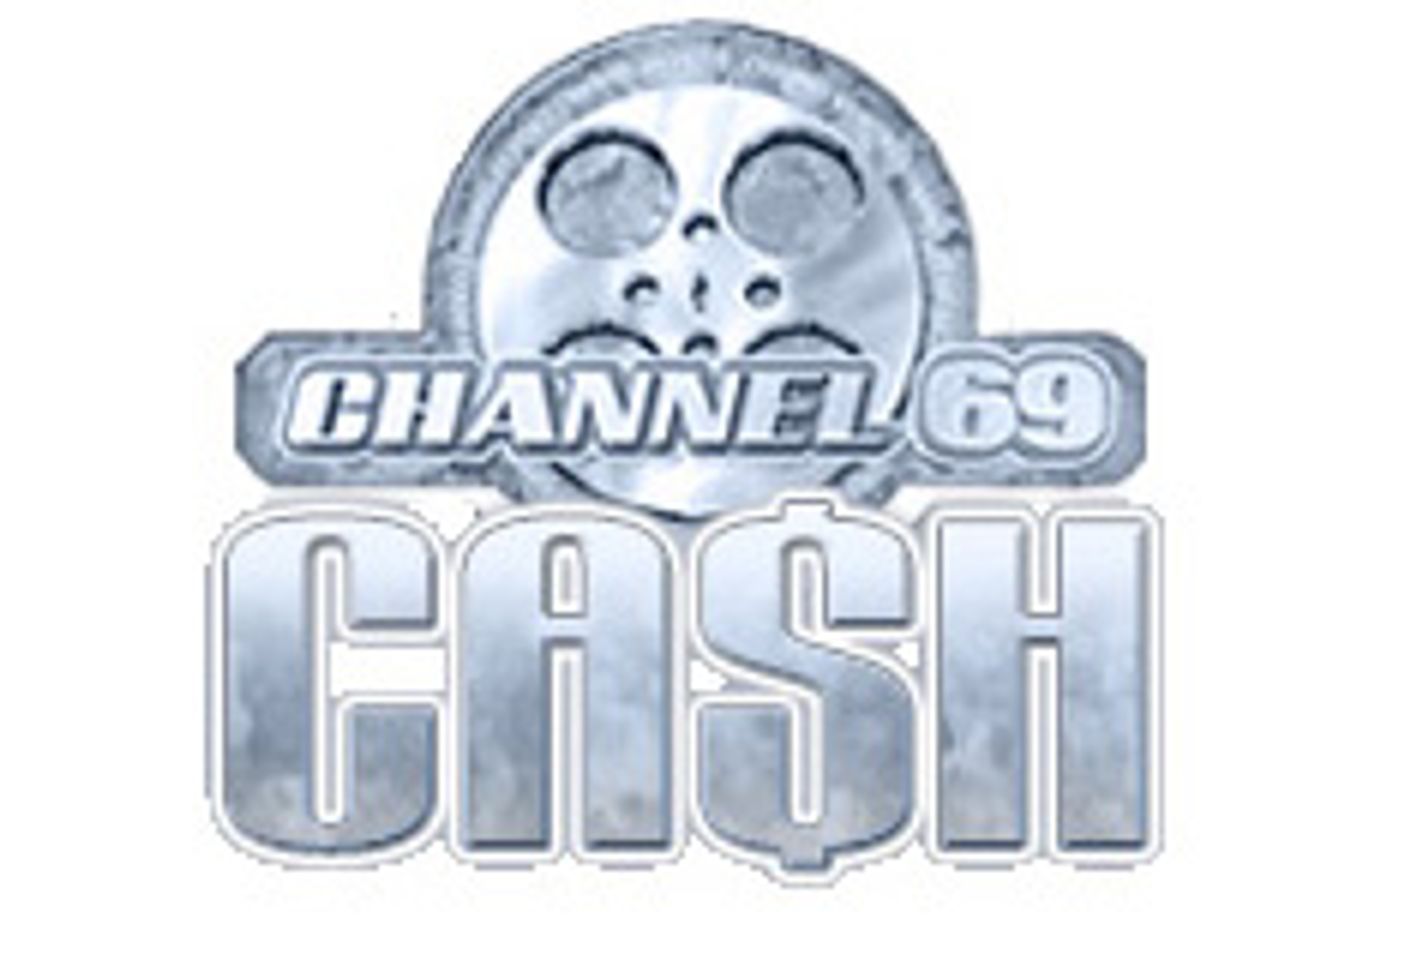 Channel 69 Adds BBWHeavytits.com to Its Lineup of Niche Sites